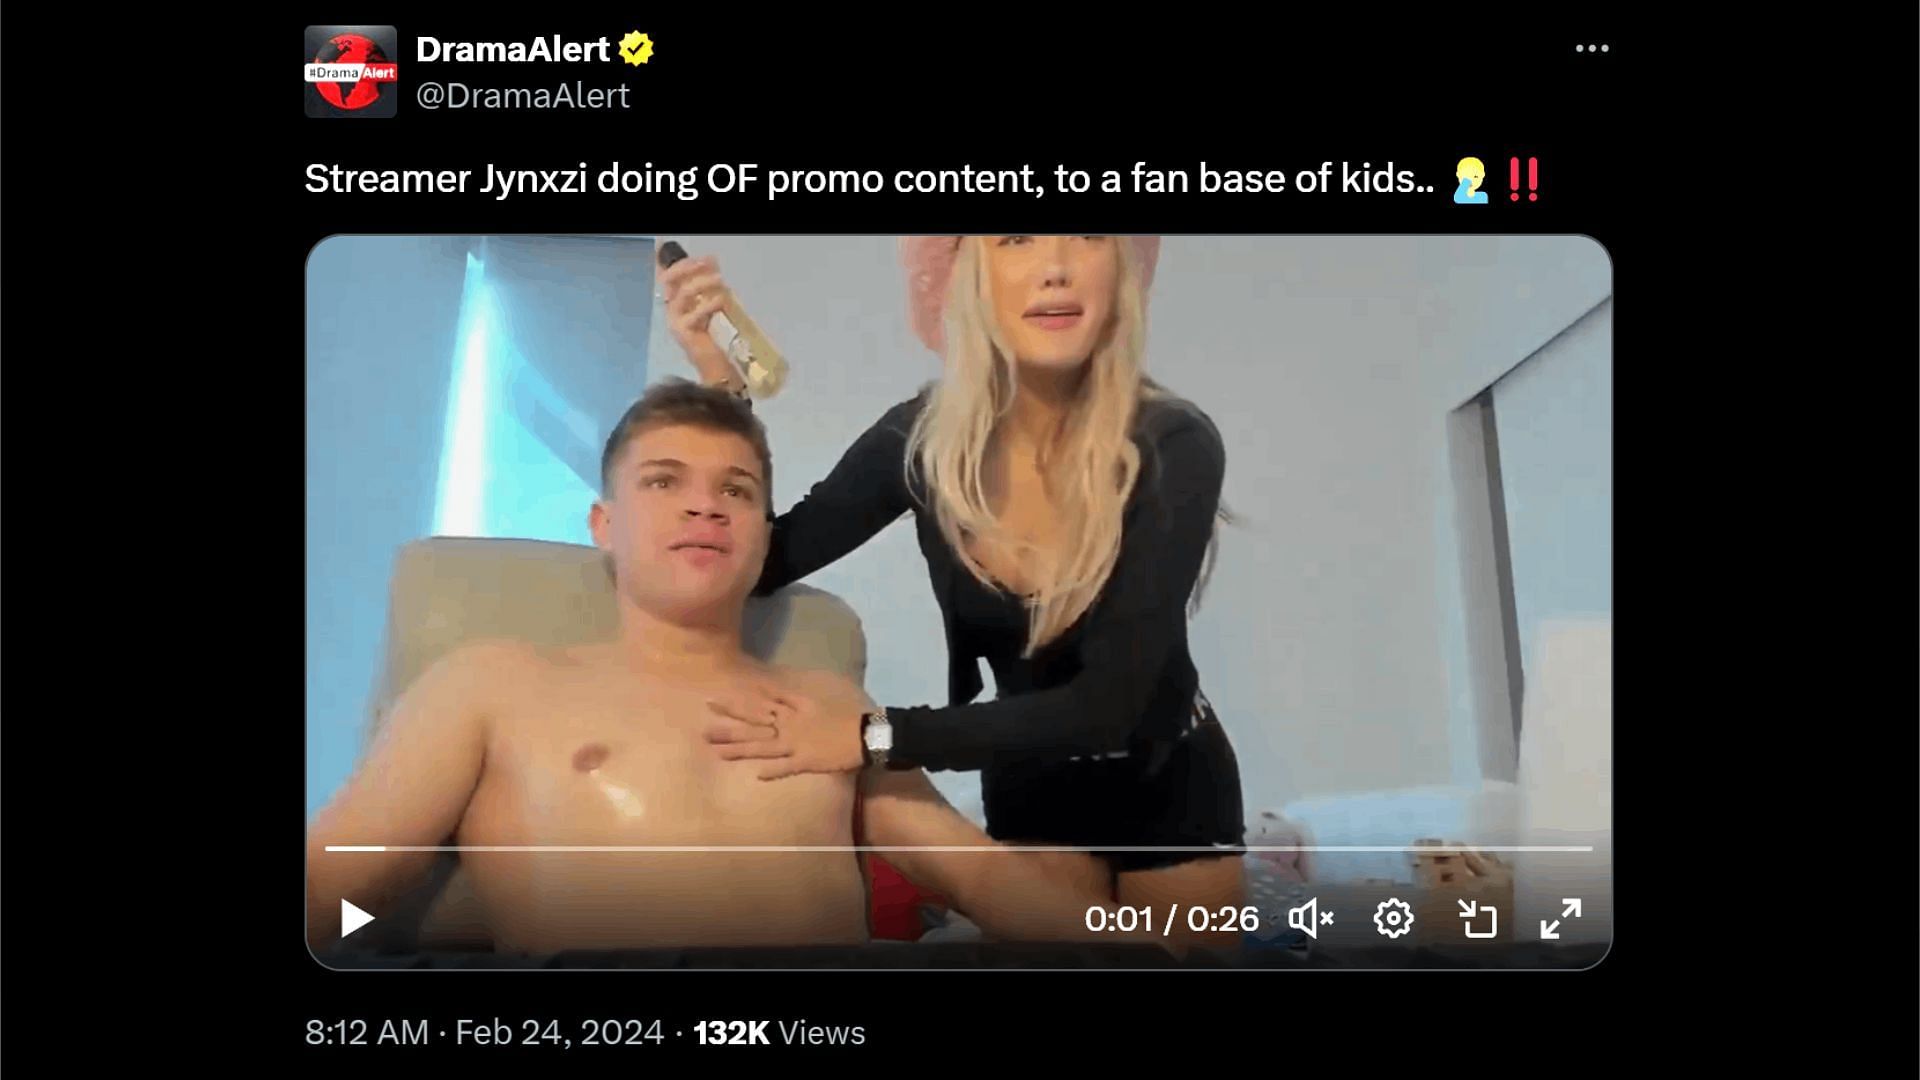 Jynxzi is receiving criticism following his OF promotional stream (Image via DramaAlert/X)